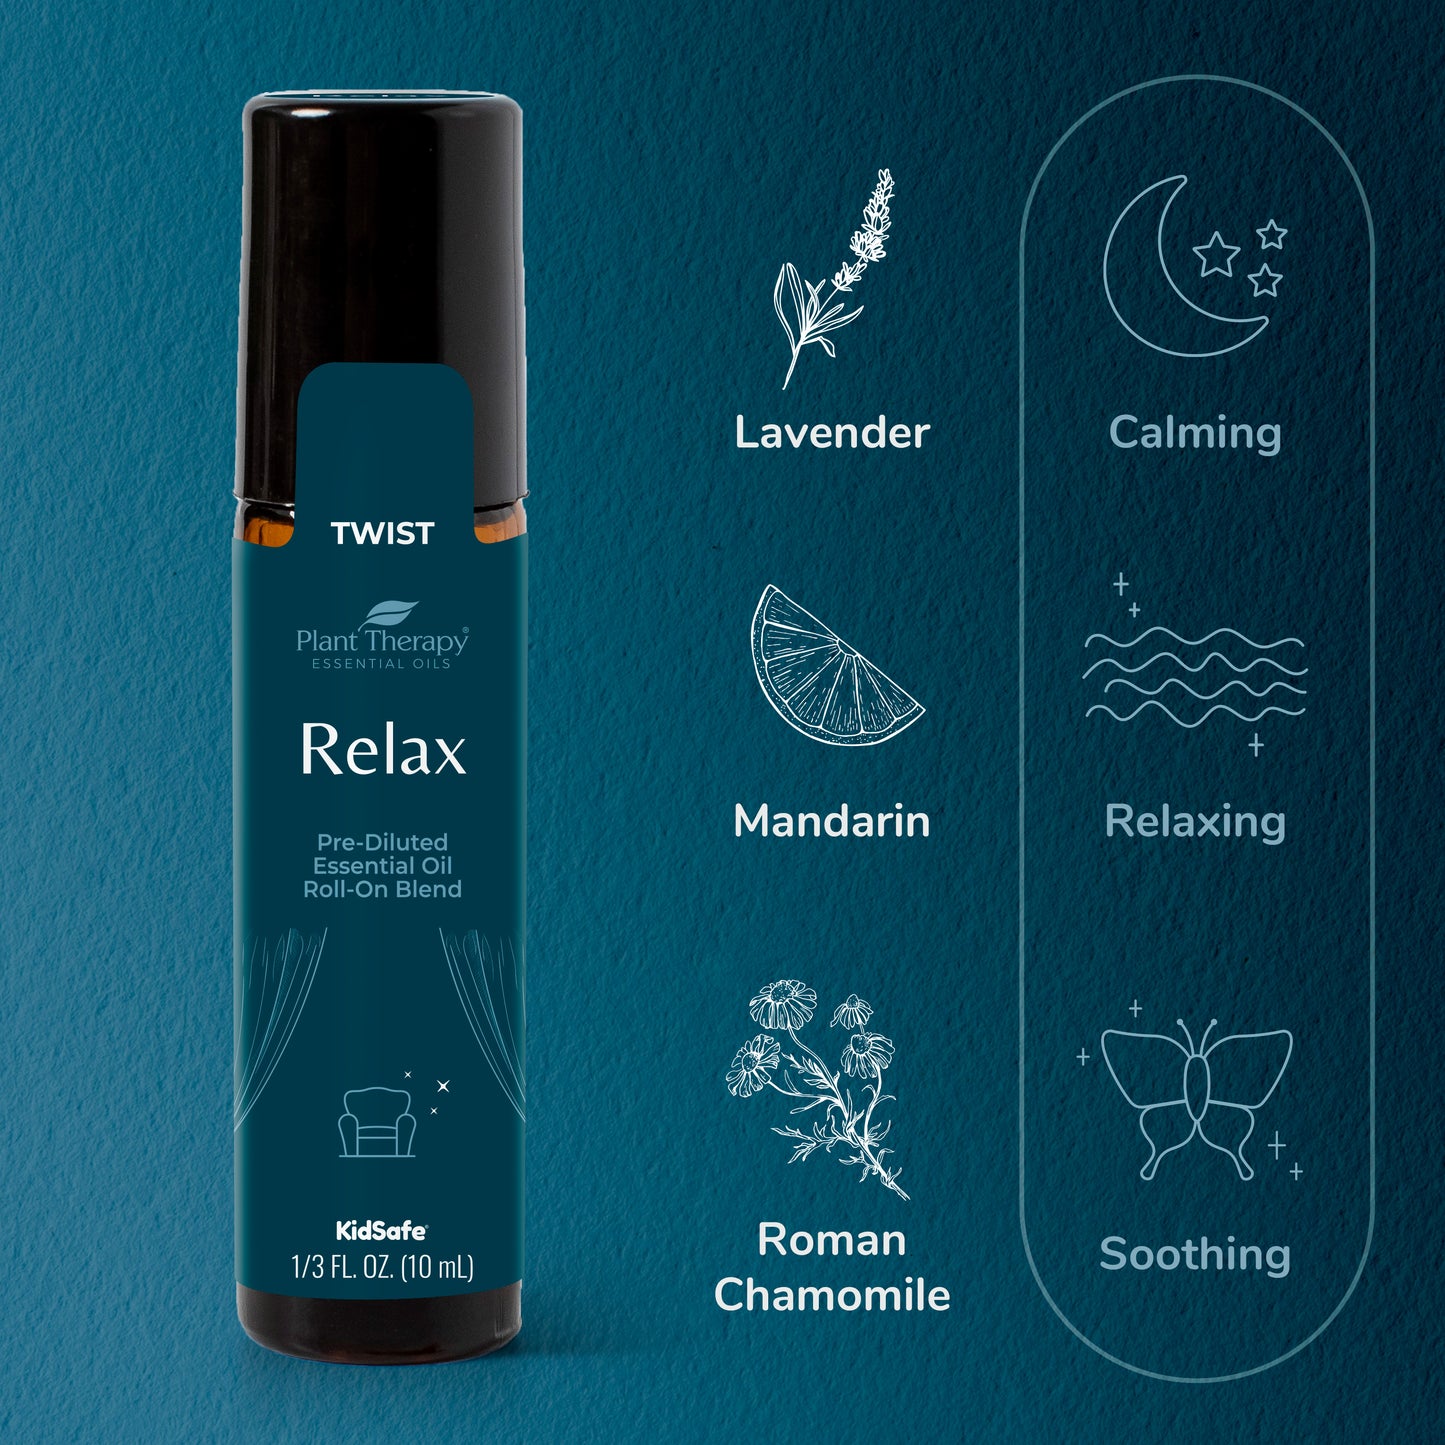 Relax Essential Oil Blend Pre-Diluted Roll-On